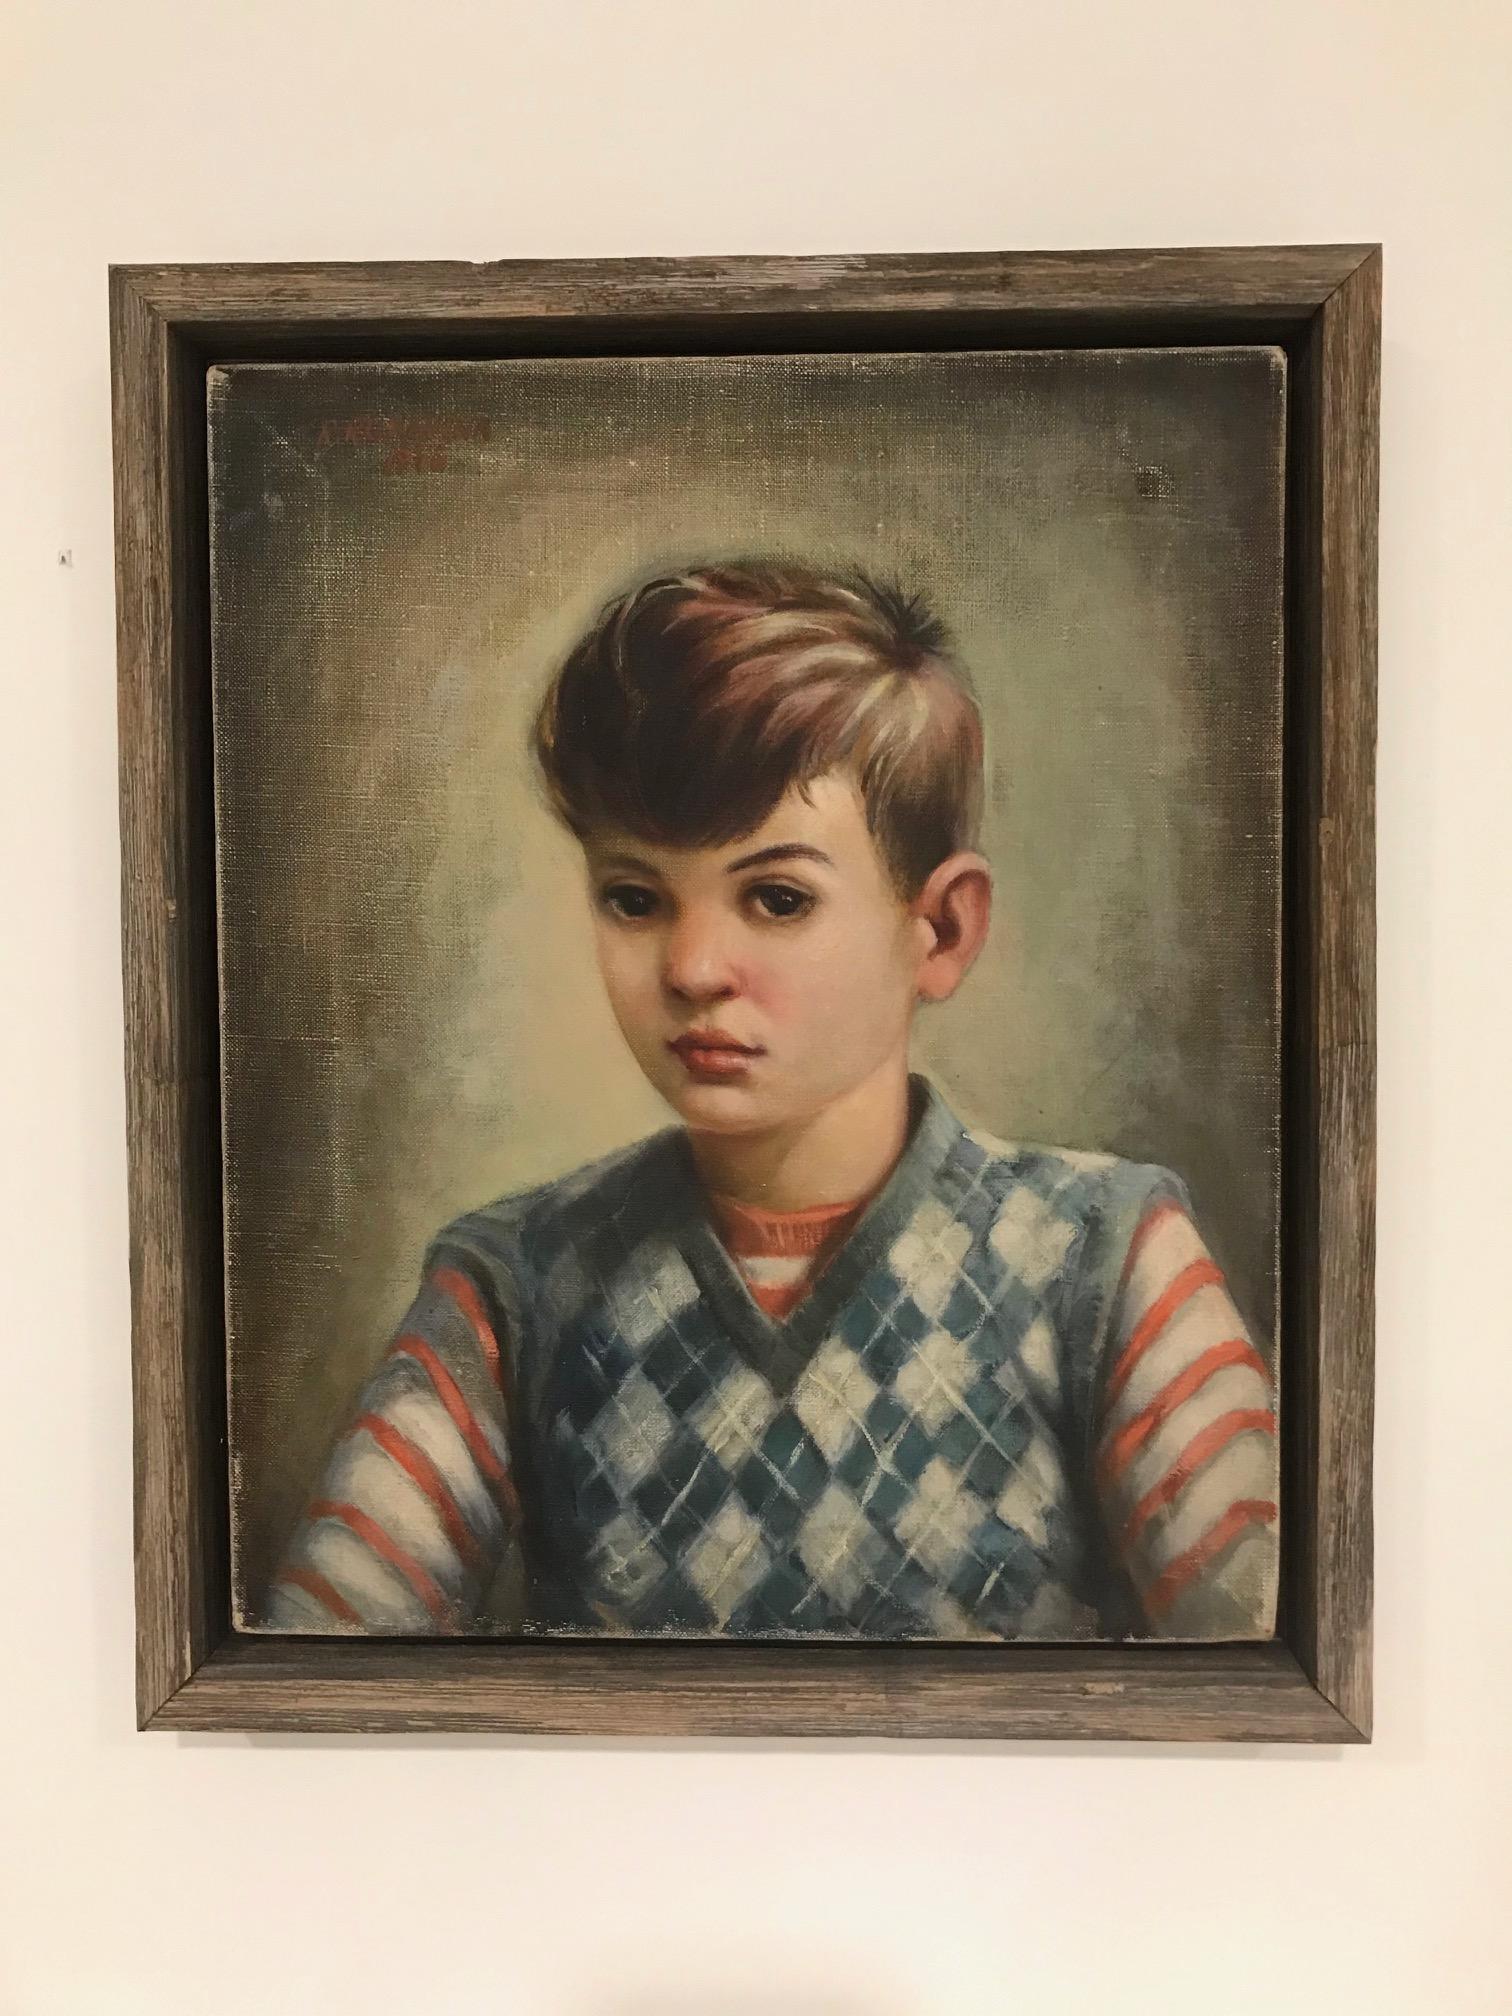 Vintage portrait of a young boy wearing a striped red shirt with blue argyle sweater. Oil on canvas painting by artist Robert Rukavina (1914-1977), who lived in the United States and is known for his realist figure and portrait artwork. There is a